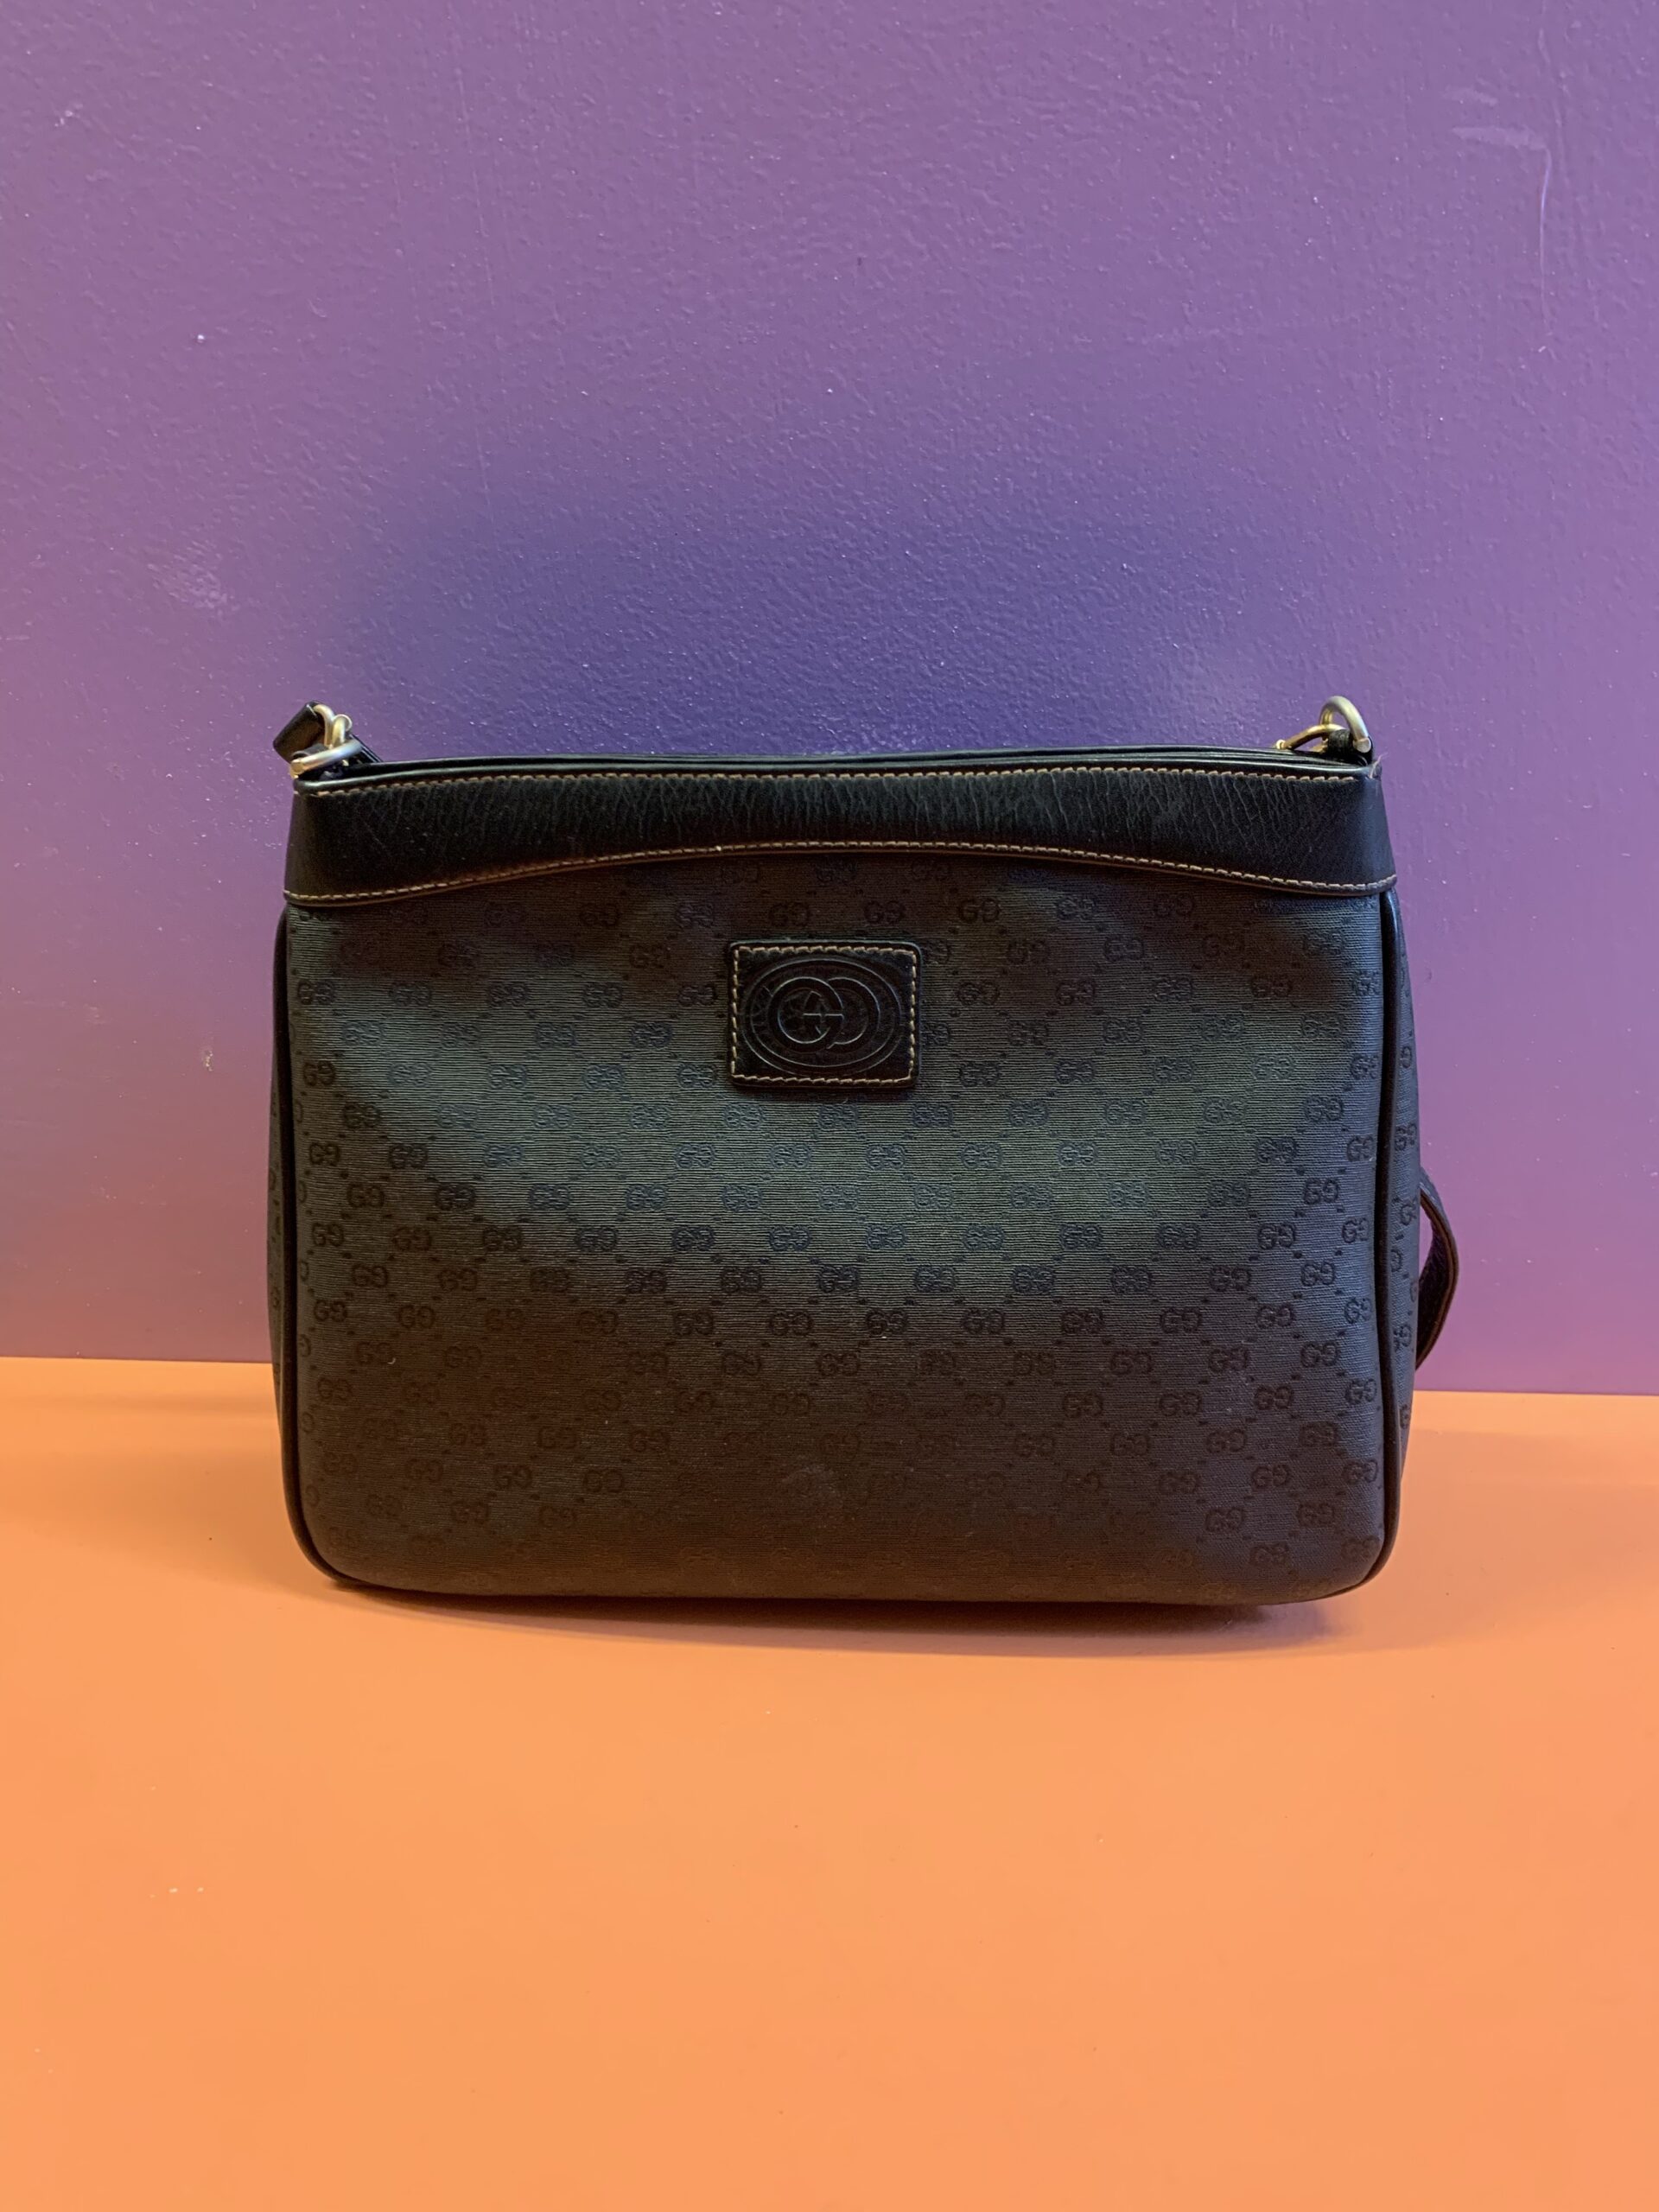 I miss you vintage - Gucci black leather Abbey D-ring pochette bag $299  #guccibags . . Available in store or purchase online with free ship in  Canada for orders $150+. Find additional